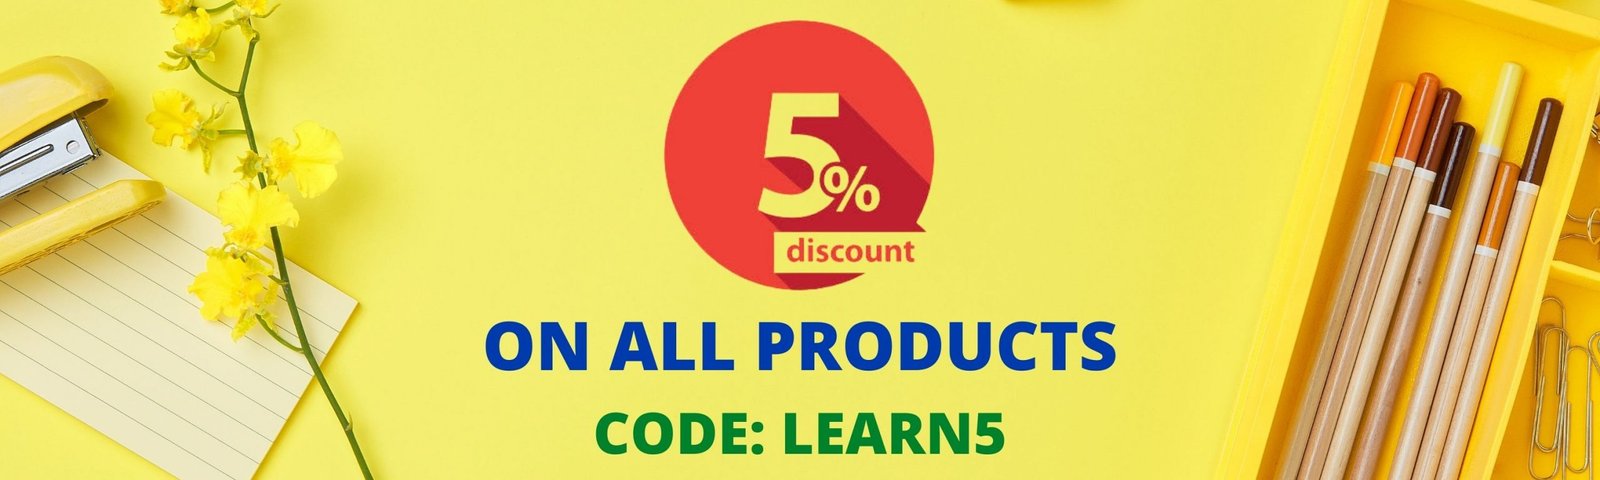 5% DISCOUNT ON ALL STATIONERY PRODUCTS